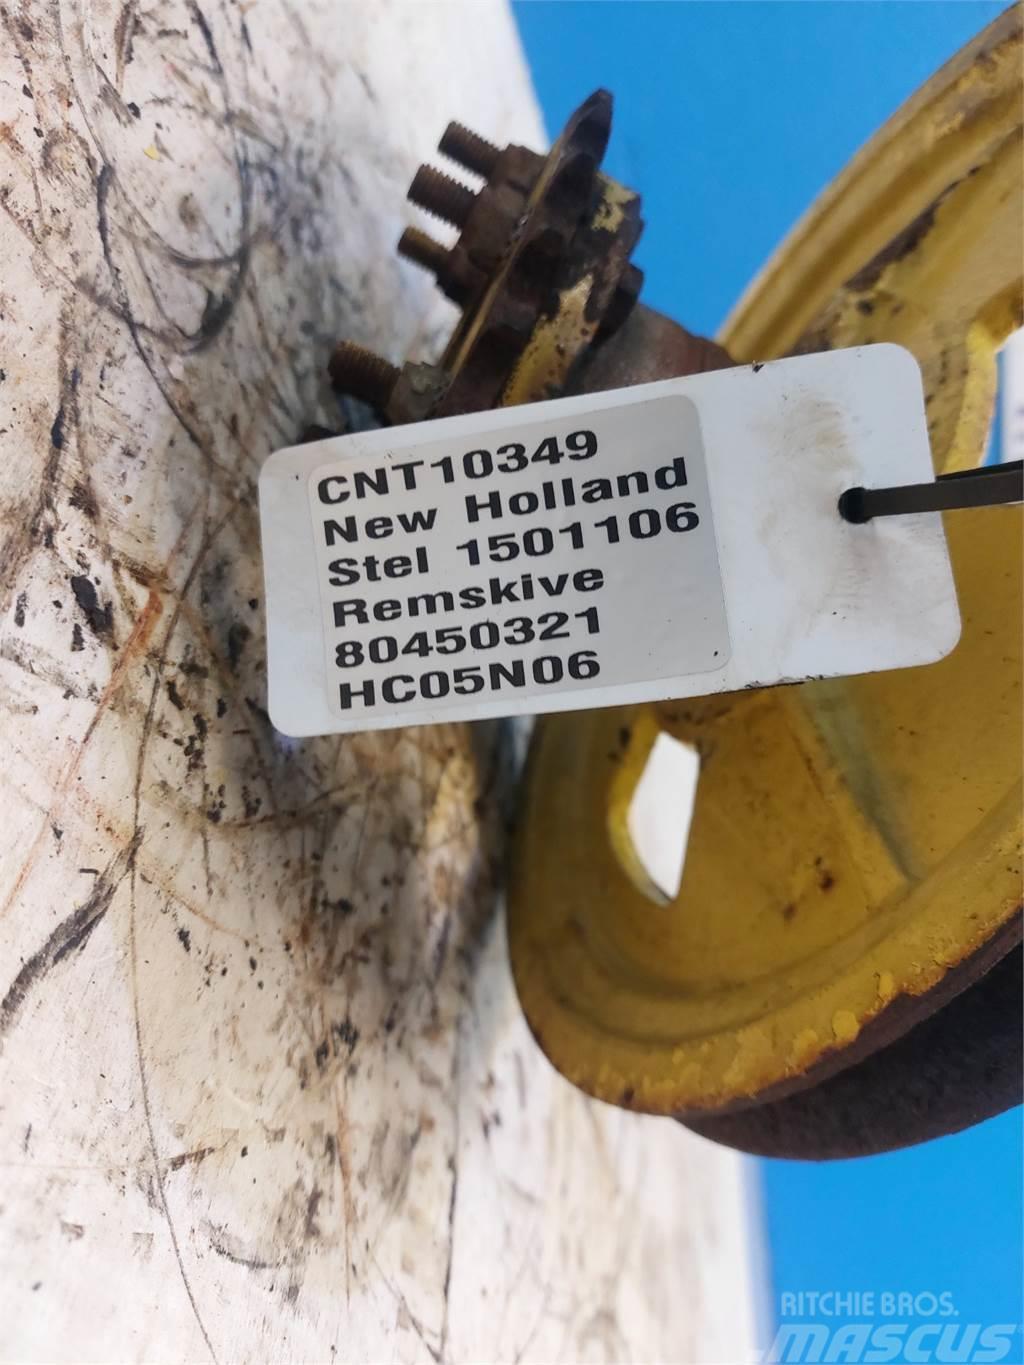 New Holland 1520 Combine harvester spares & accessories